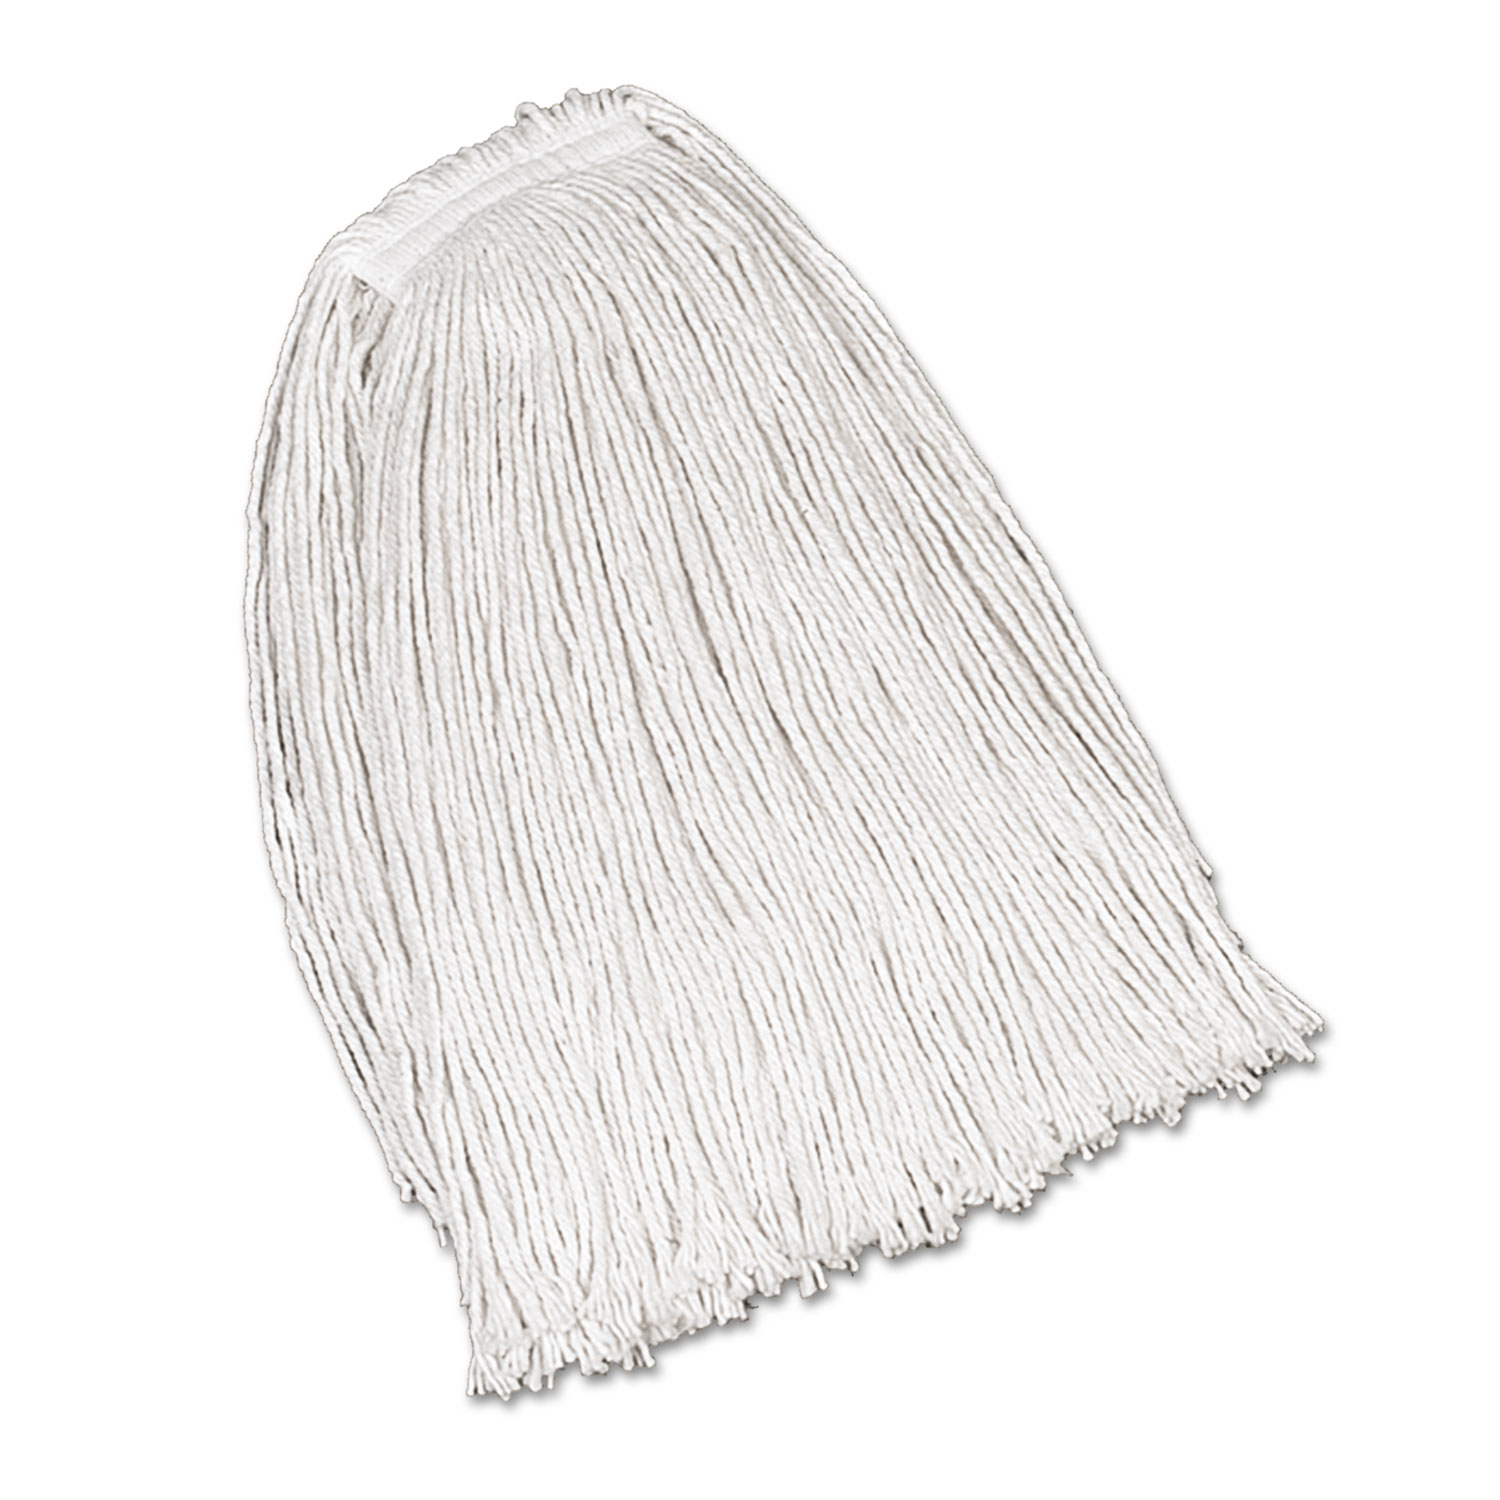  Rubbermaid Commercial FGV11900WH00 Economy Cotton Mop Heads, Cut-End, Ctn, WH, 32 oz, 1-in. White Headband, 12/CT (RCPV119) 